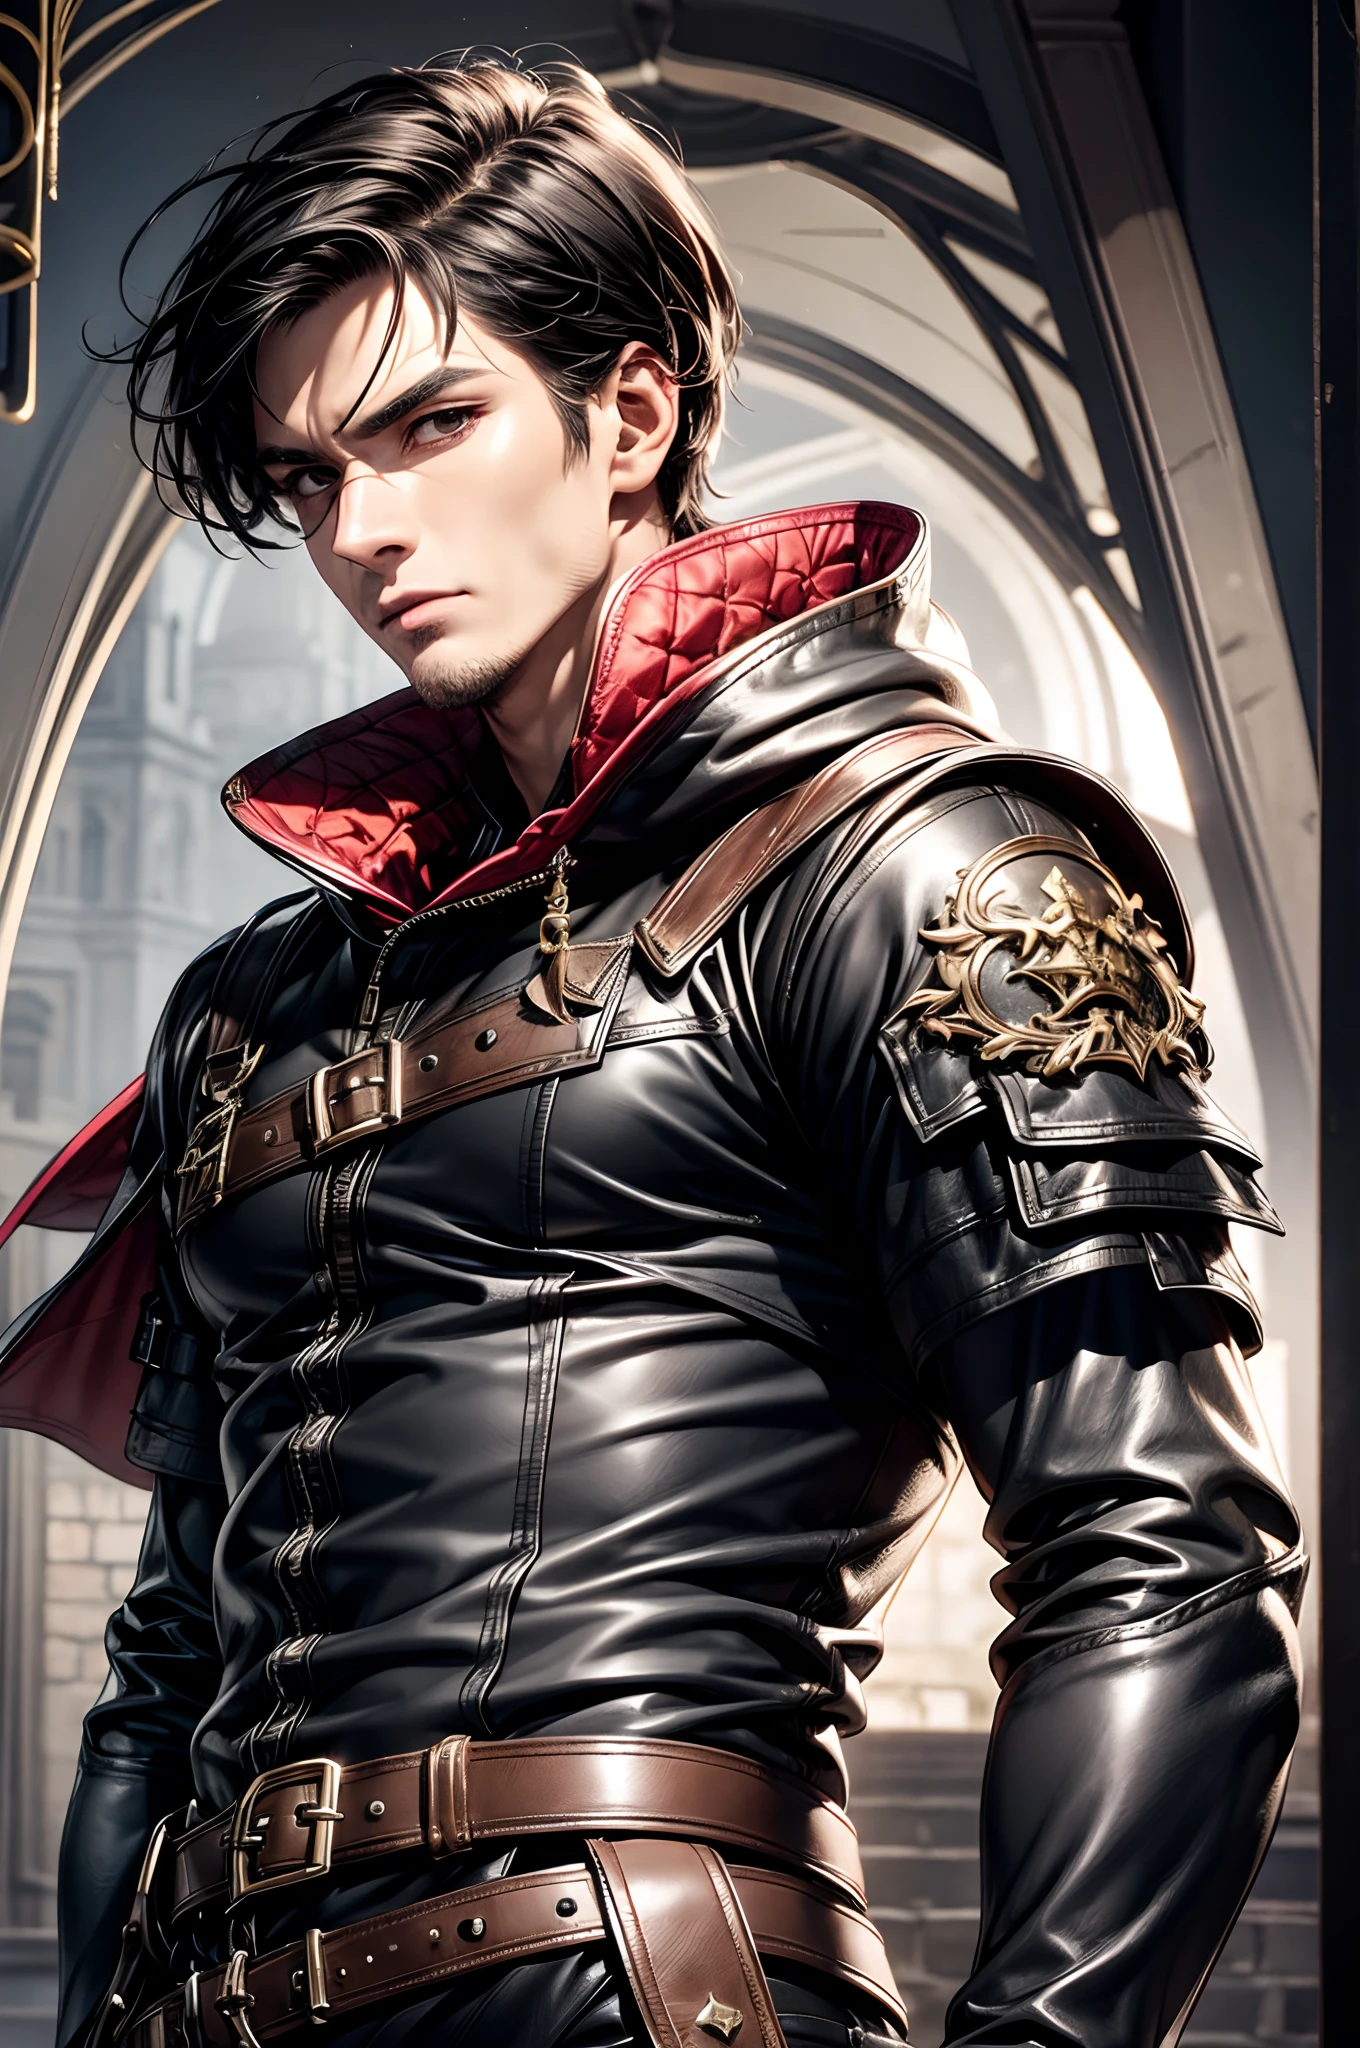 (absurderes, hight resolution, ultra-detailliert), 1 male, Adult, Handsome, High muscular face, broad shoulders, finely detailed eyes, Short black hair, Brown eyes, Black cloak, Wearing a hood, Leather Vest, Leather bag at waist......, 2 daggers on the belt, castle, Medieval atmosphere, Natural Light and Shadow, Bright particles fly around a person, Fantastic, Mysterious, Bright glow,  Seated Pose, Serious expression, Cold, thoughtful, Mouth Shut